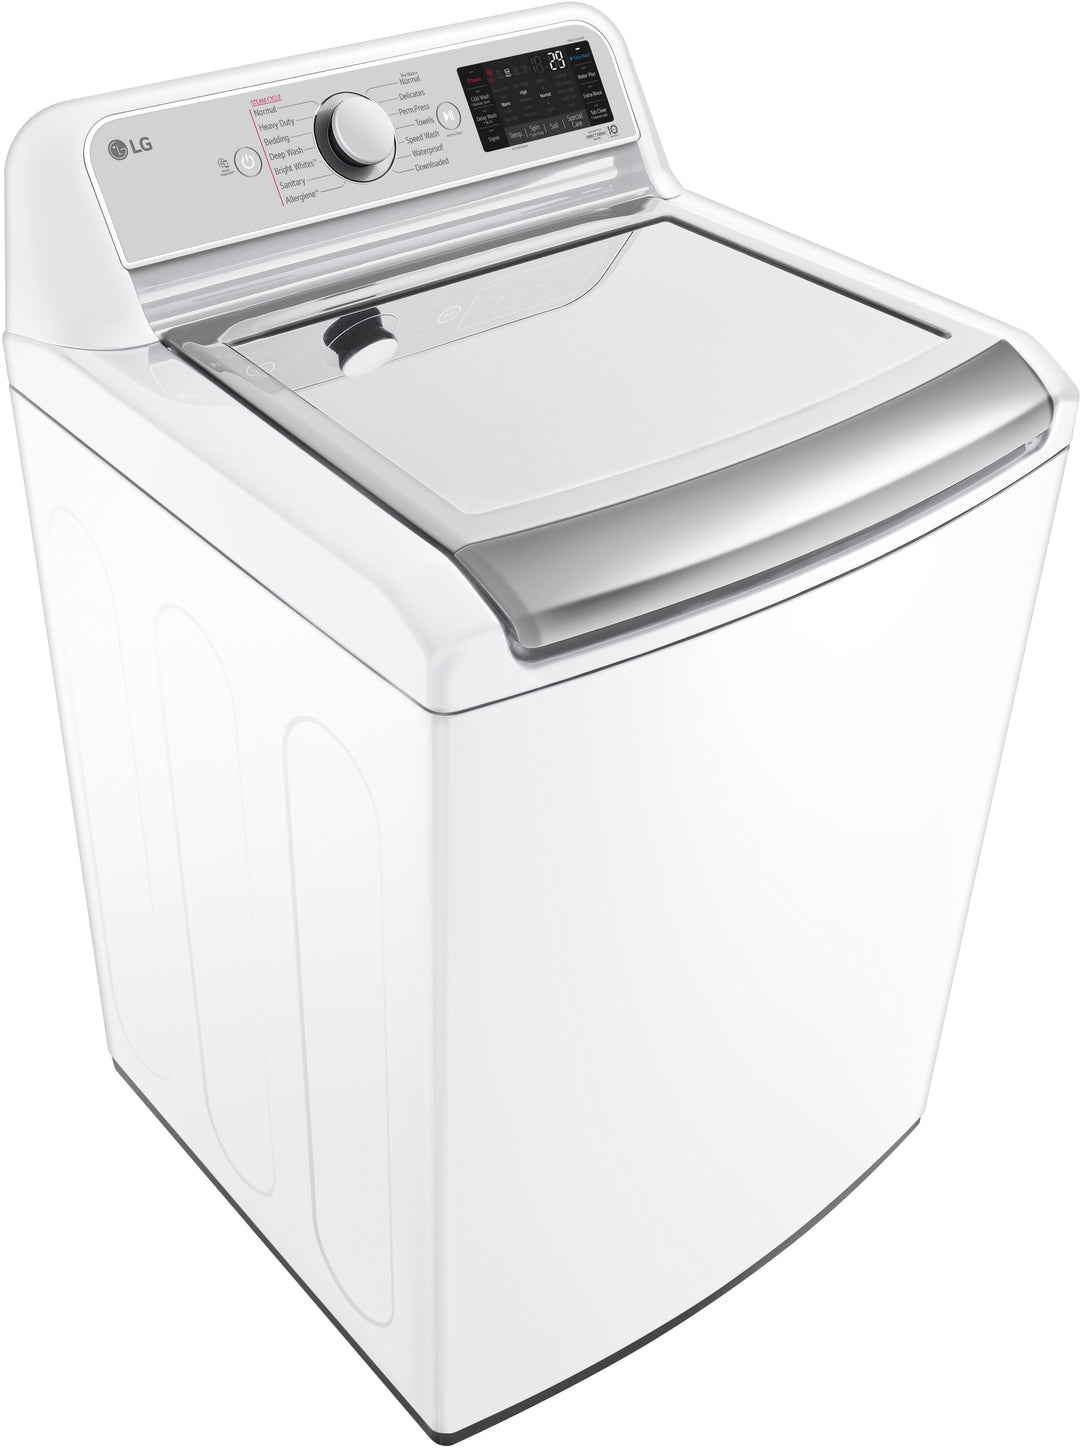 LG - 5.5 Cu. Ft. High-Efficiency Smart Top Load Washer with Steam and TurboWash3D Technology - White_14